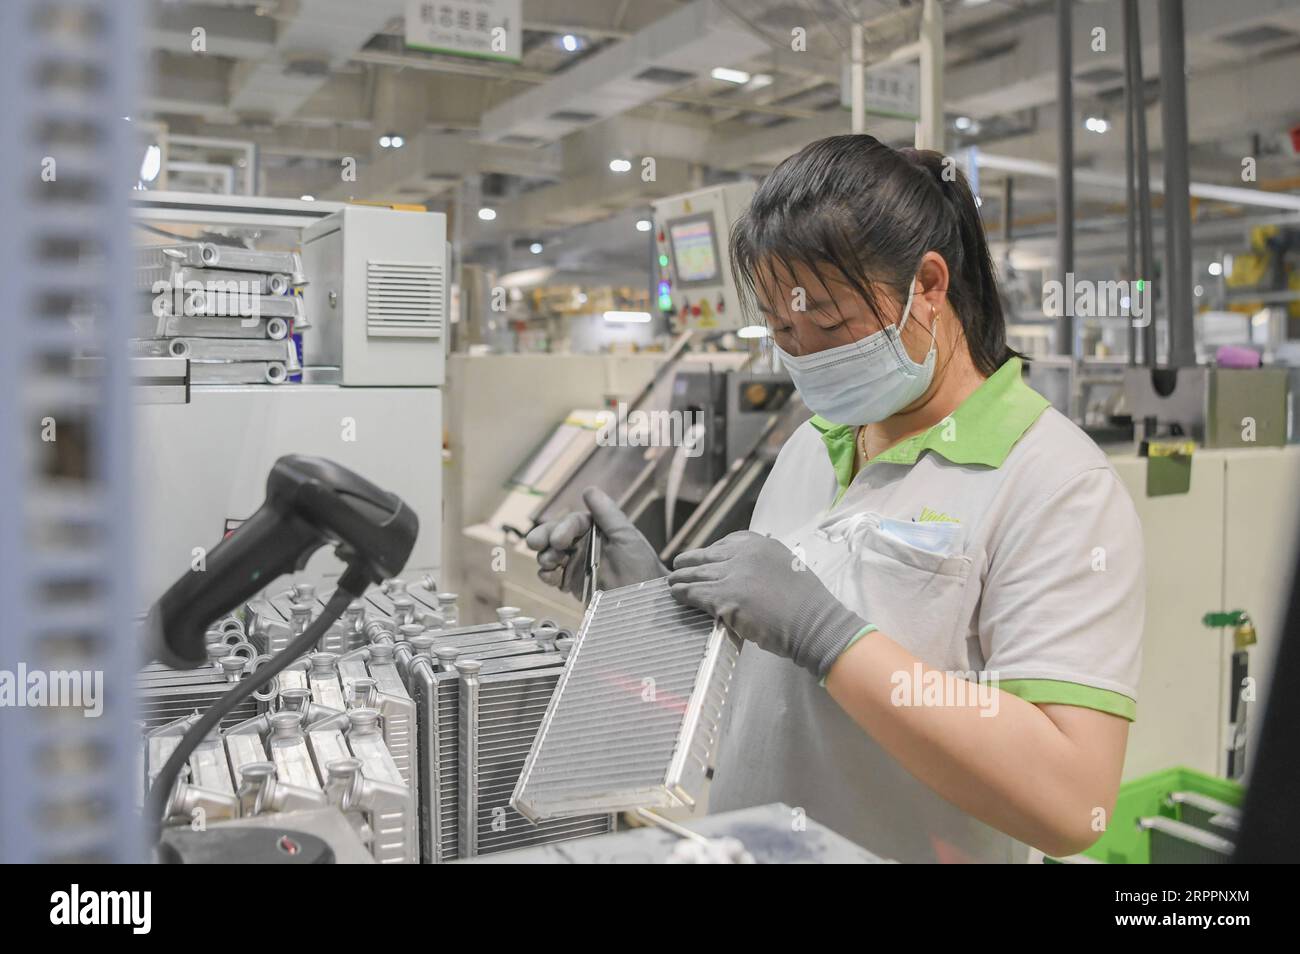 200320 -- WUHAN, March 20, 2020 -- A staff member works on a production line at a company in Jingzhou, central China s Hubei Province, March 19, 2020. The Valeo Hubei company has resumed production since late February. Over 90% capacity of the company has recovered and over 80% staff members have returned to their work.  CHINA-HUBEI-JINGZHOU-PRODUCTION RESUMPTION CN ChengxMin PUBLICATIONxNOTxINxCHN Stock Photo